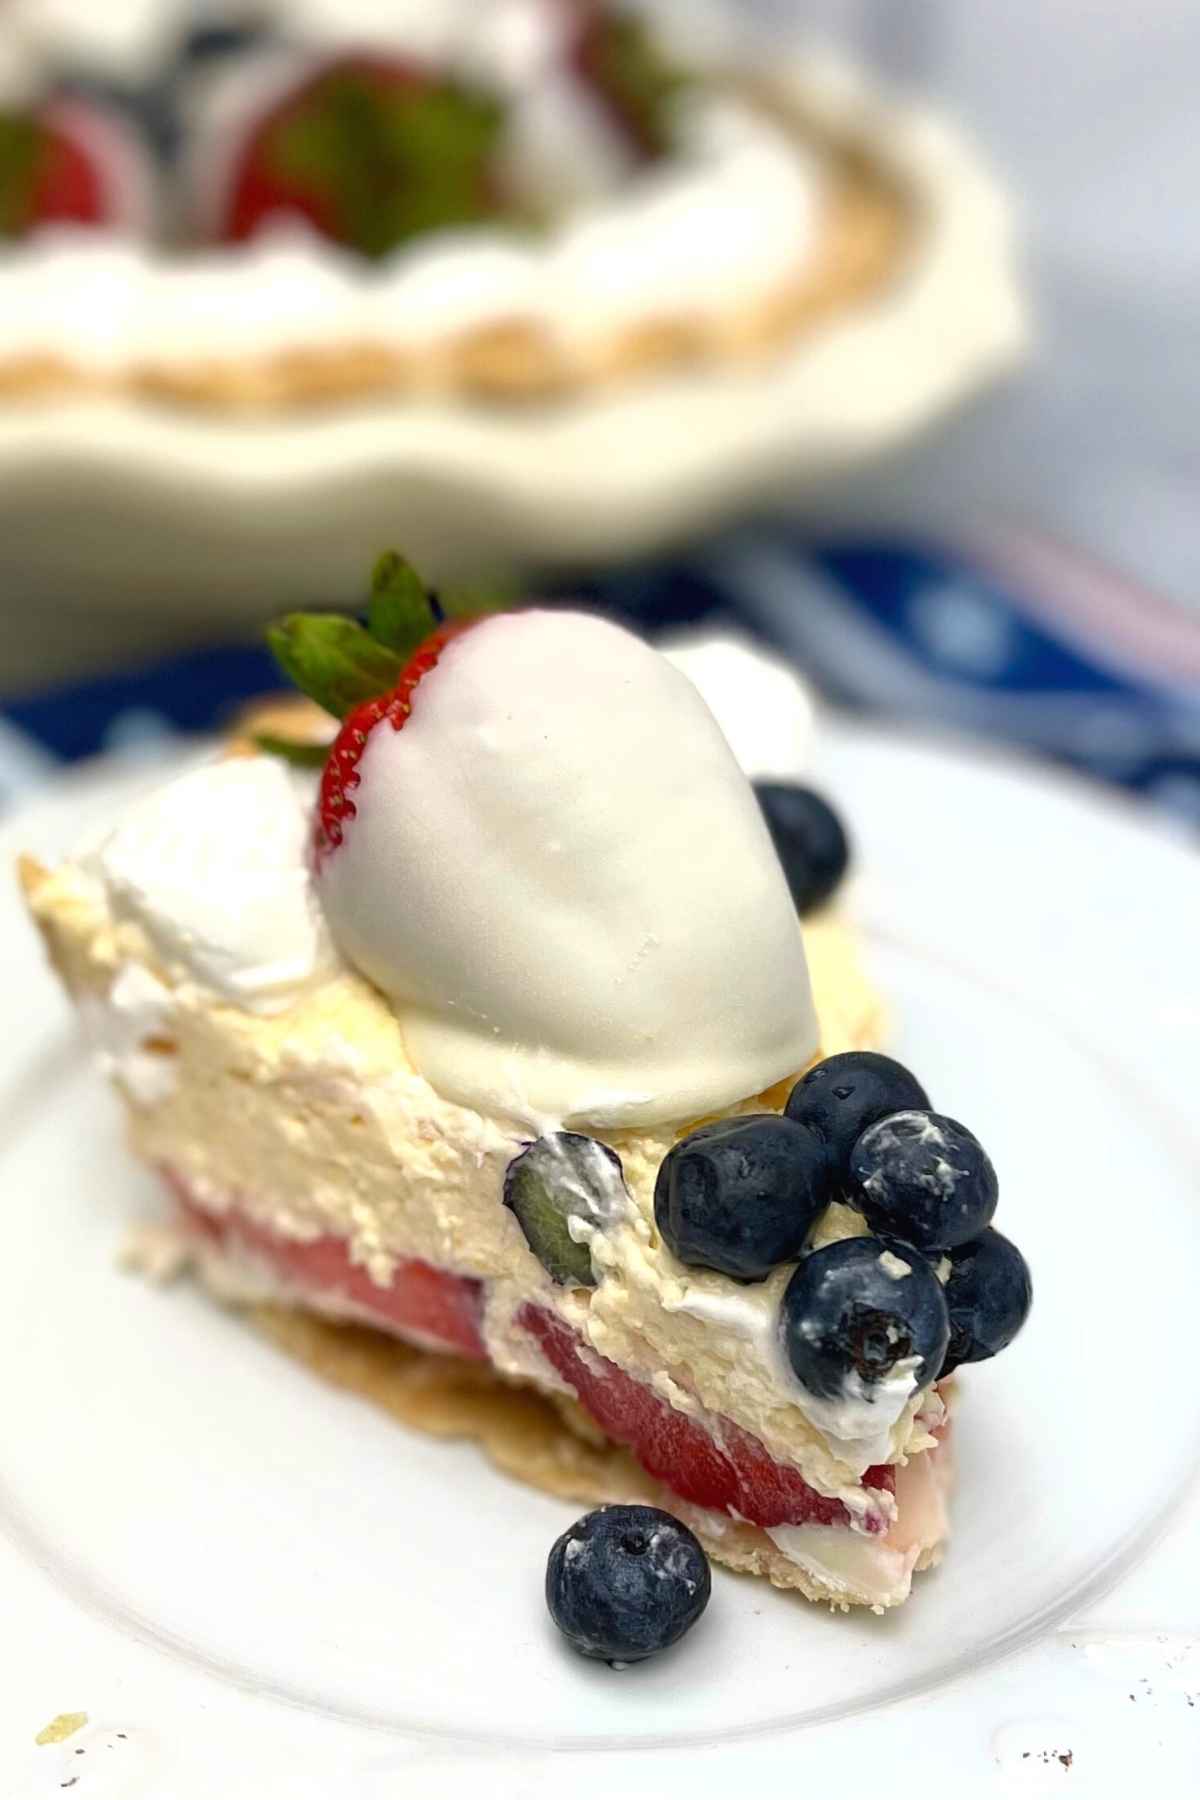 One slice of red white and bluebery pie on a white plate.